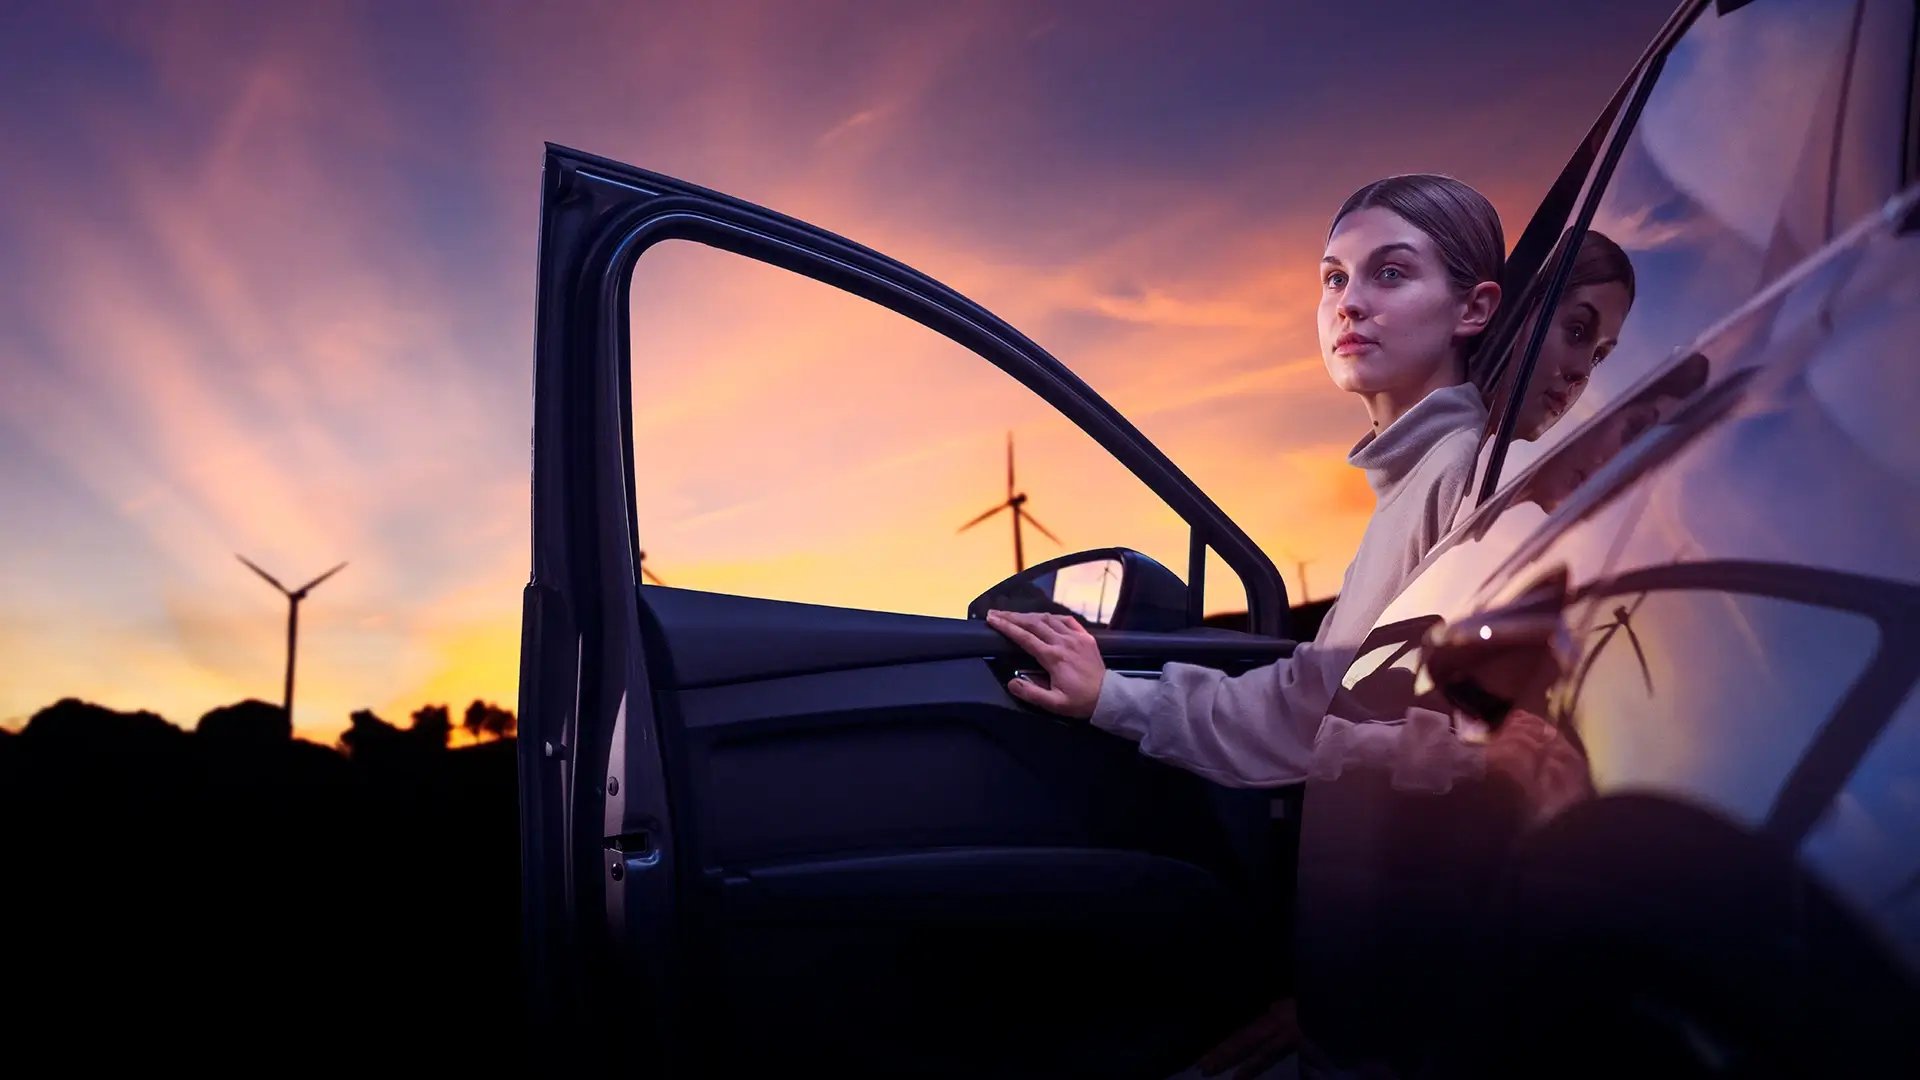 Confident woman in electric vehicle with wind turbine sunrise